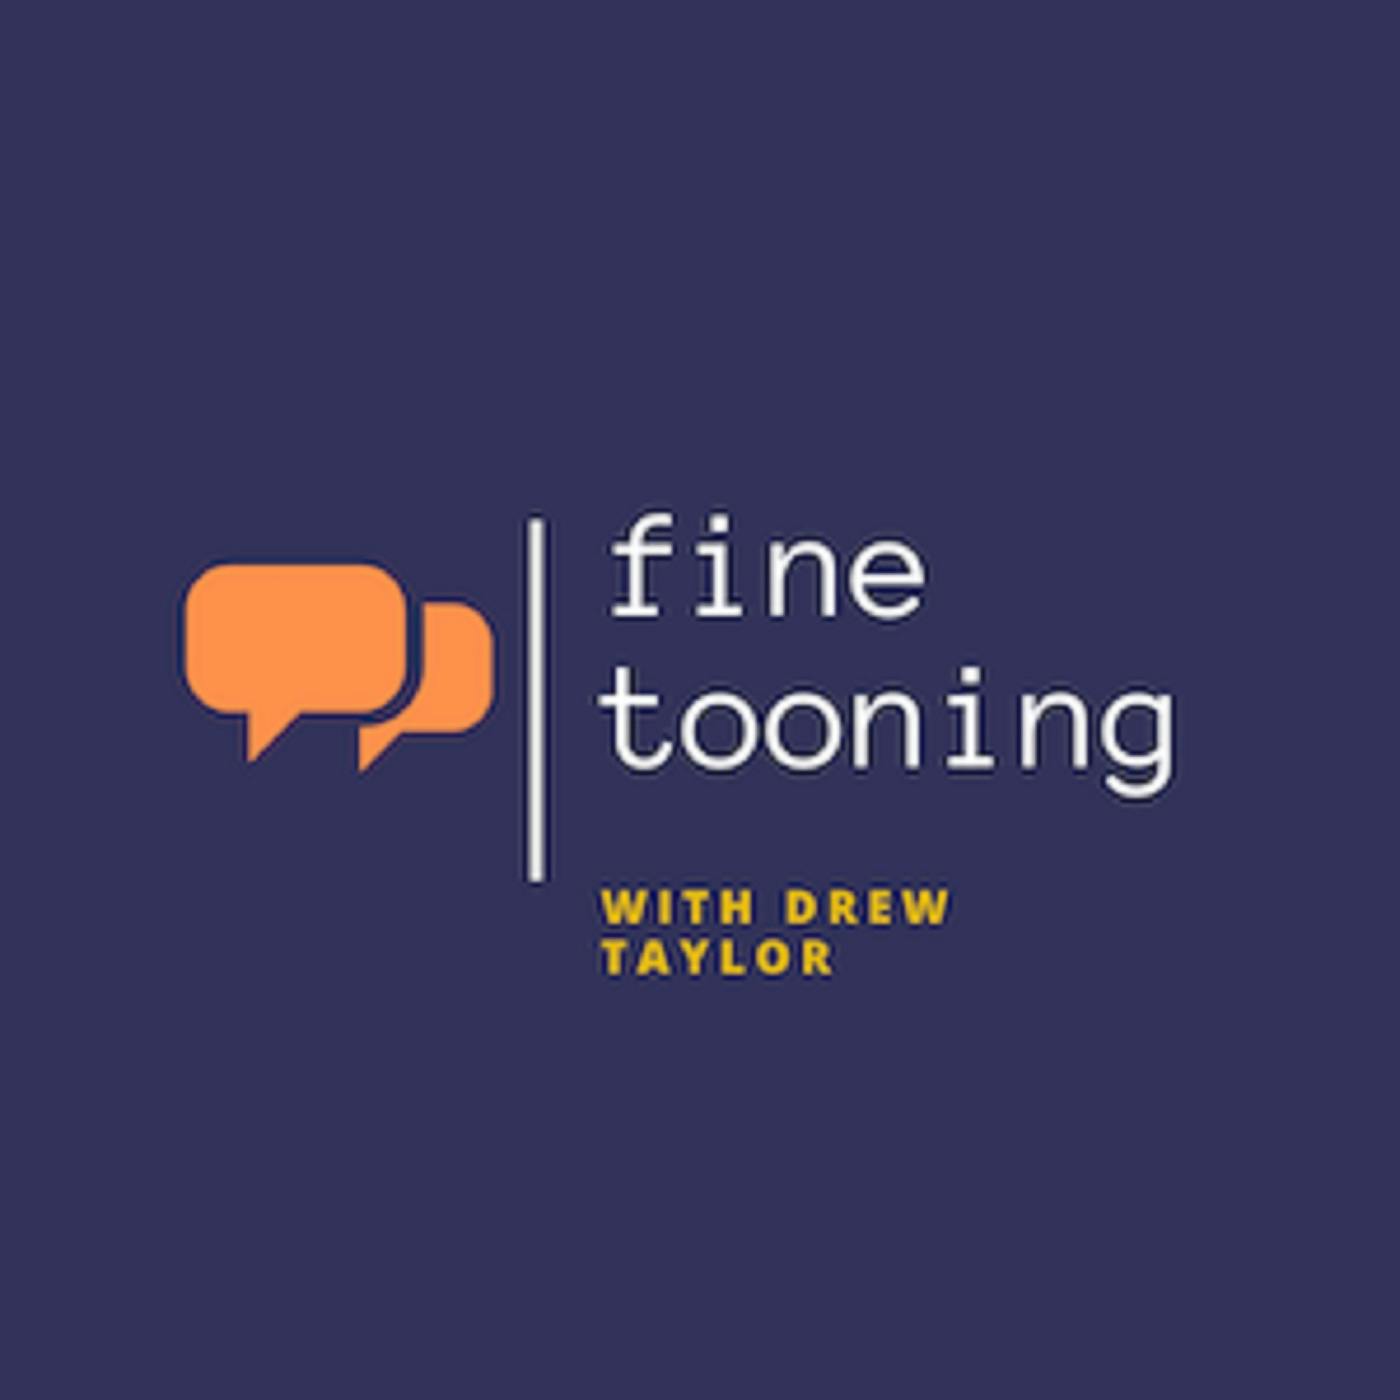 Fine Tooning with Drew Taylor - Episode 197: DreamWorks Animation preps a “Bad Guys” holiday special Image